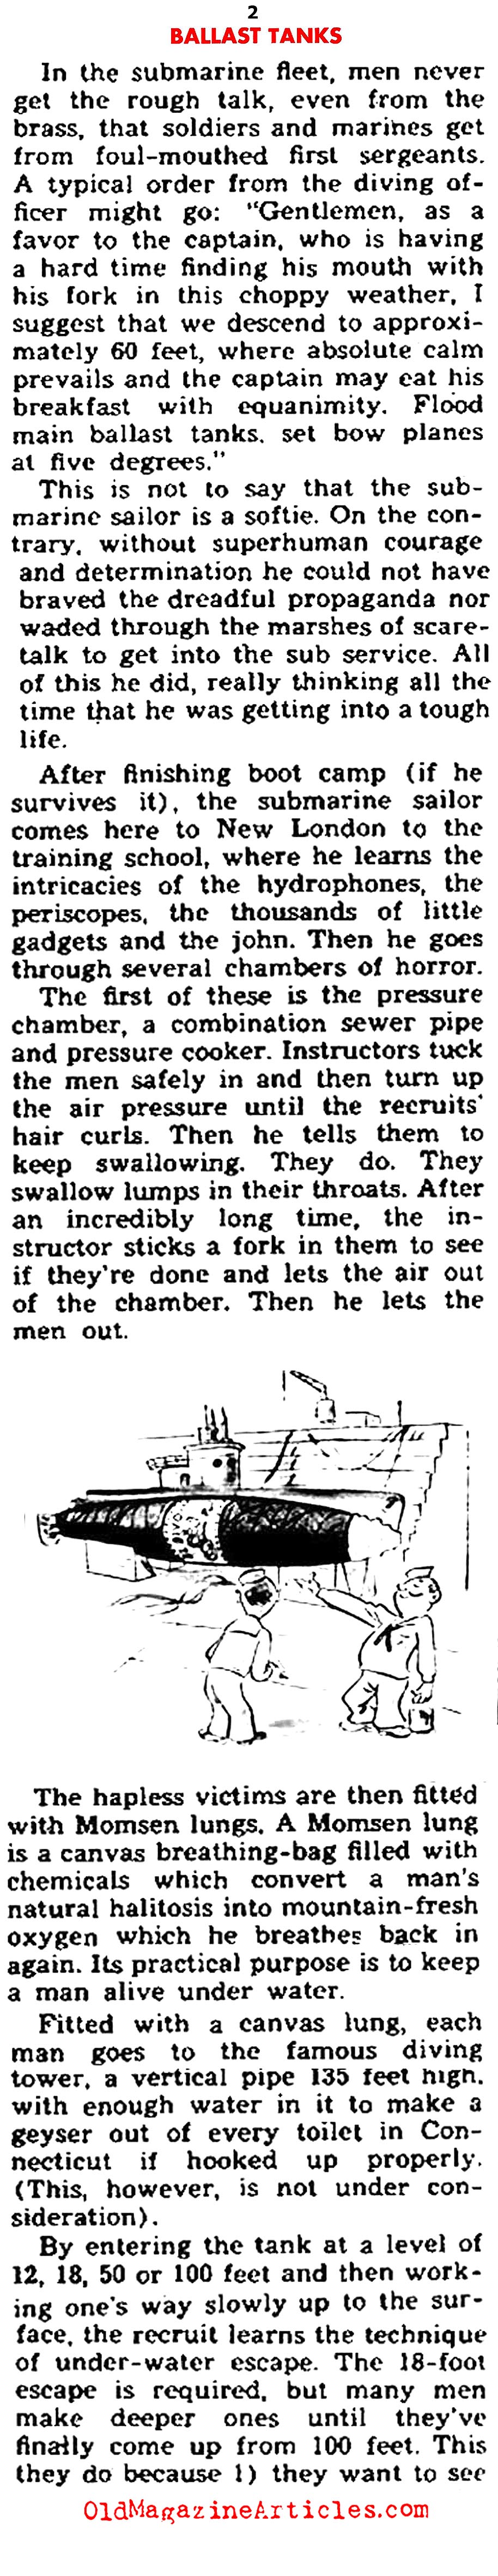 Fact and Fiction About Submarines (Yank Magazine, 1943)